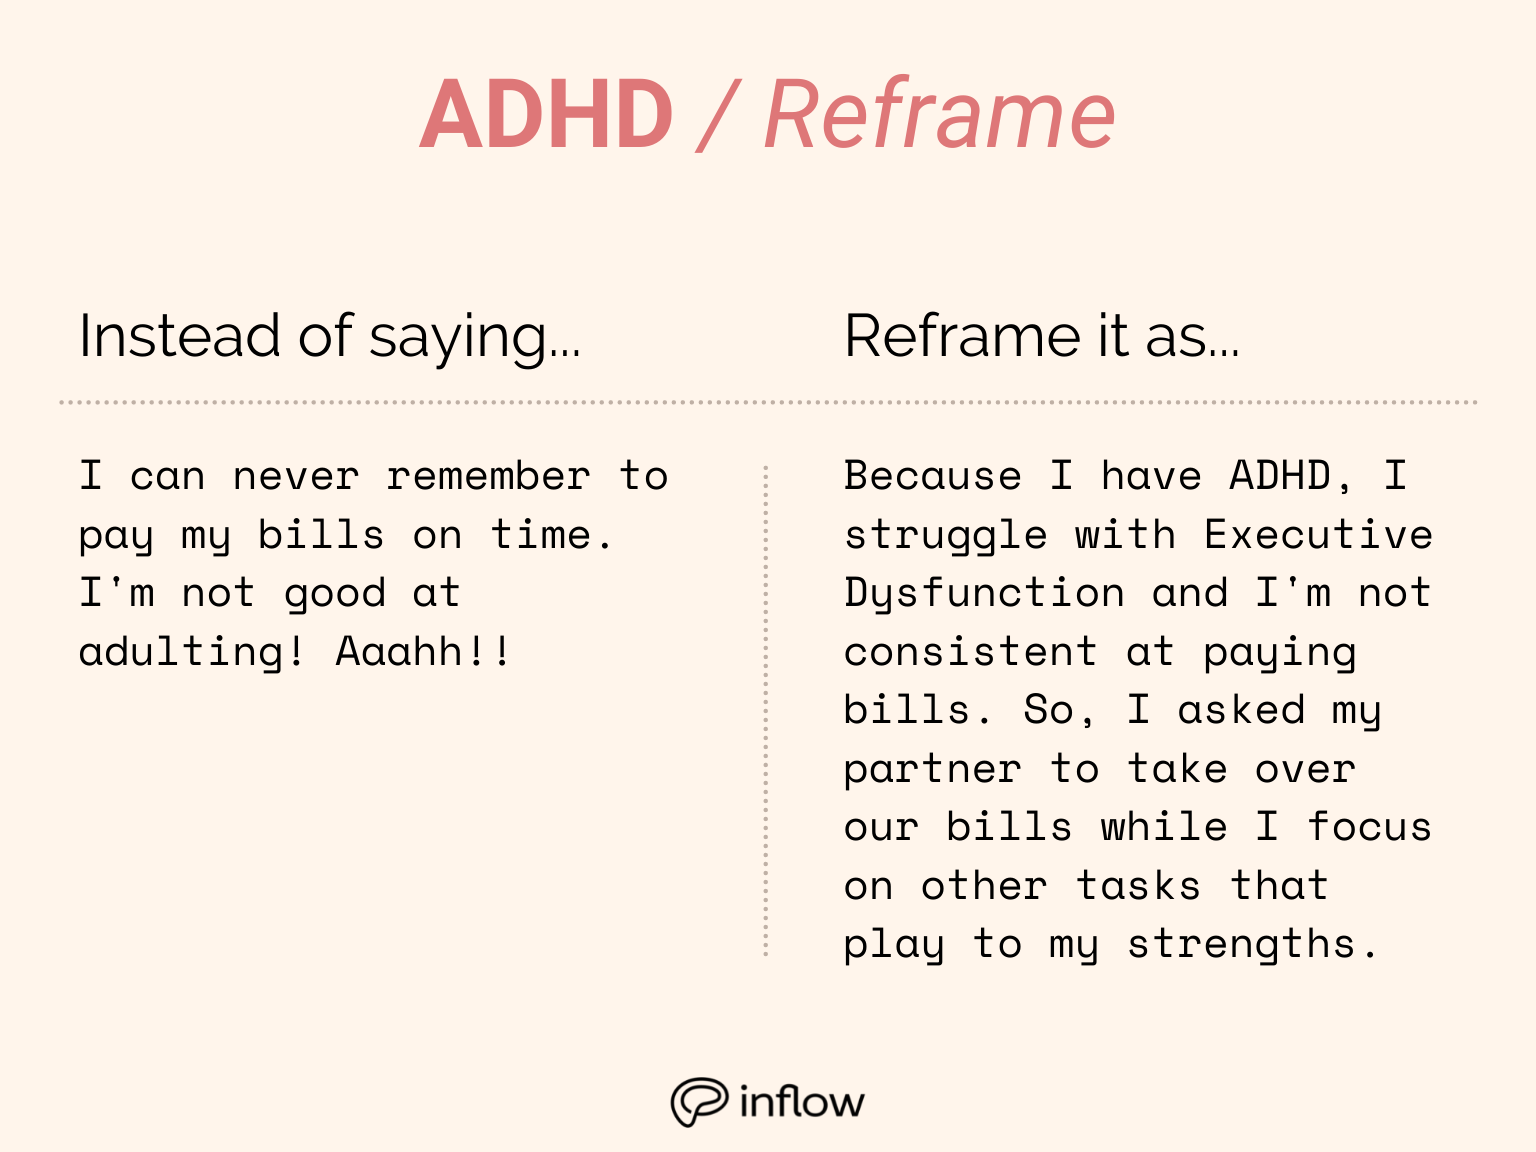 ADHD reframe. Instead of saying "I can never remember to pay my bills on time. Im not good at adulting! Ah!" Try: "Because I have ADHD, I striggle with Executive Dysfunction, and I'm not consistent at paying bills. So, I asked my partner to take over our bills while I focus on other tasks that play to my strengths.